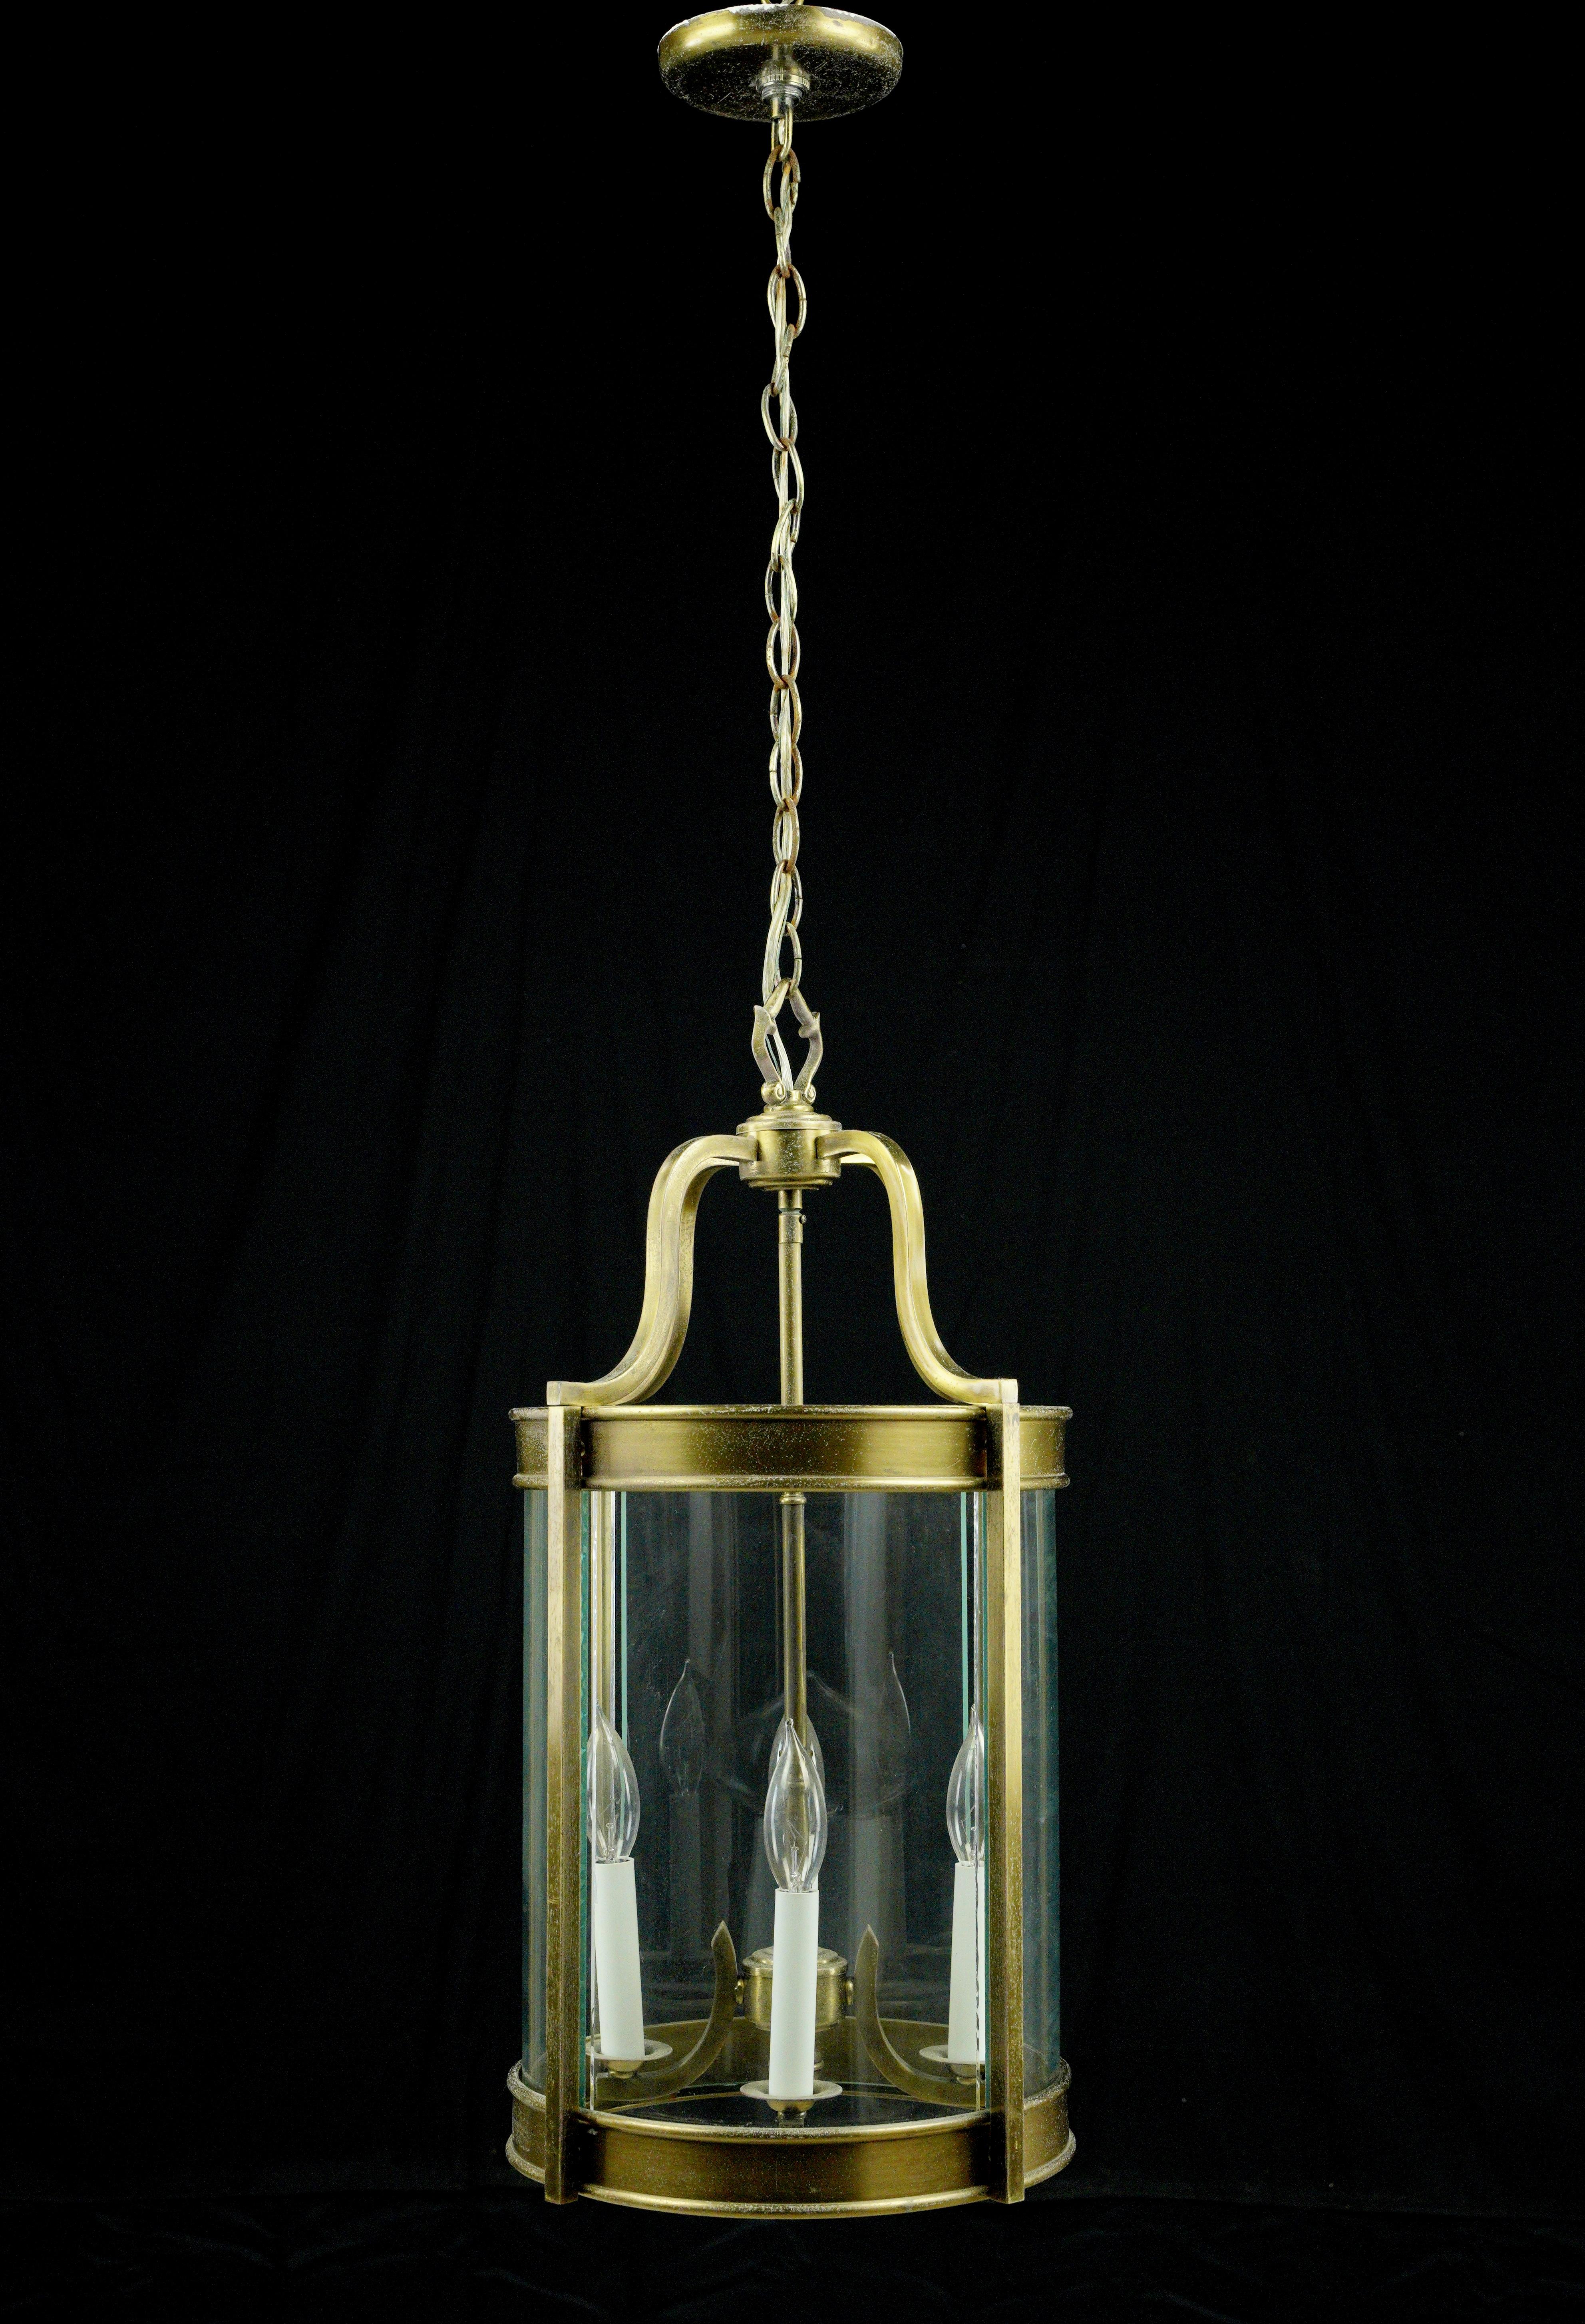 This cast brass pendant features bent glass segments forming a cylinder and topped with elegant solid brass brackets, four candle lights, and a matching chain and canopy. This light requires four candelabra light bulbs. Good condition with